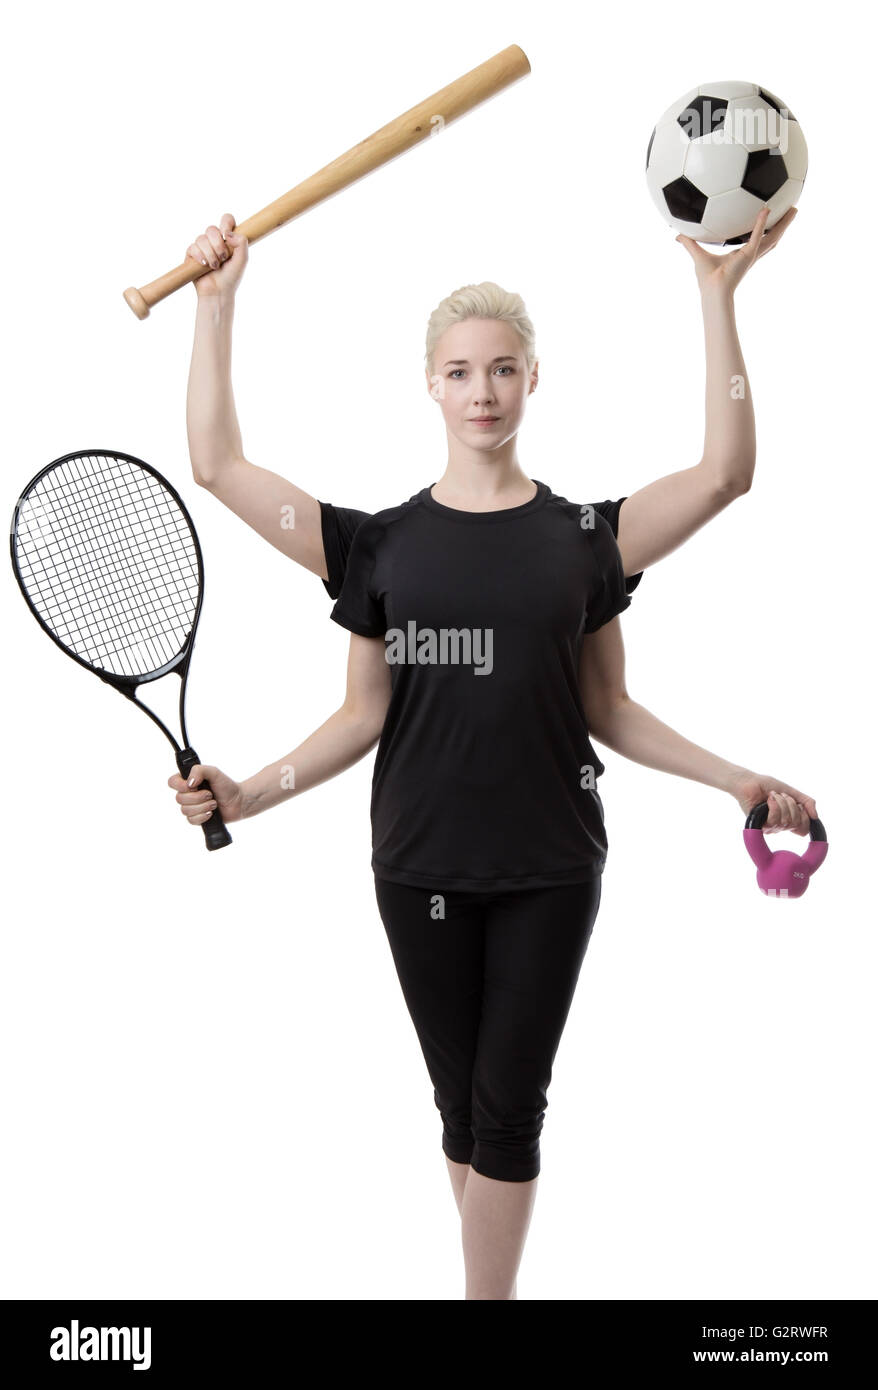 woman with four arms holding different sports items in each hand